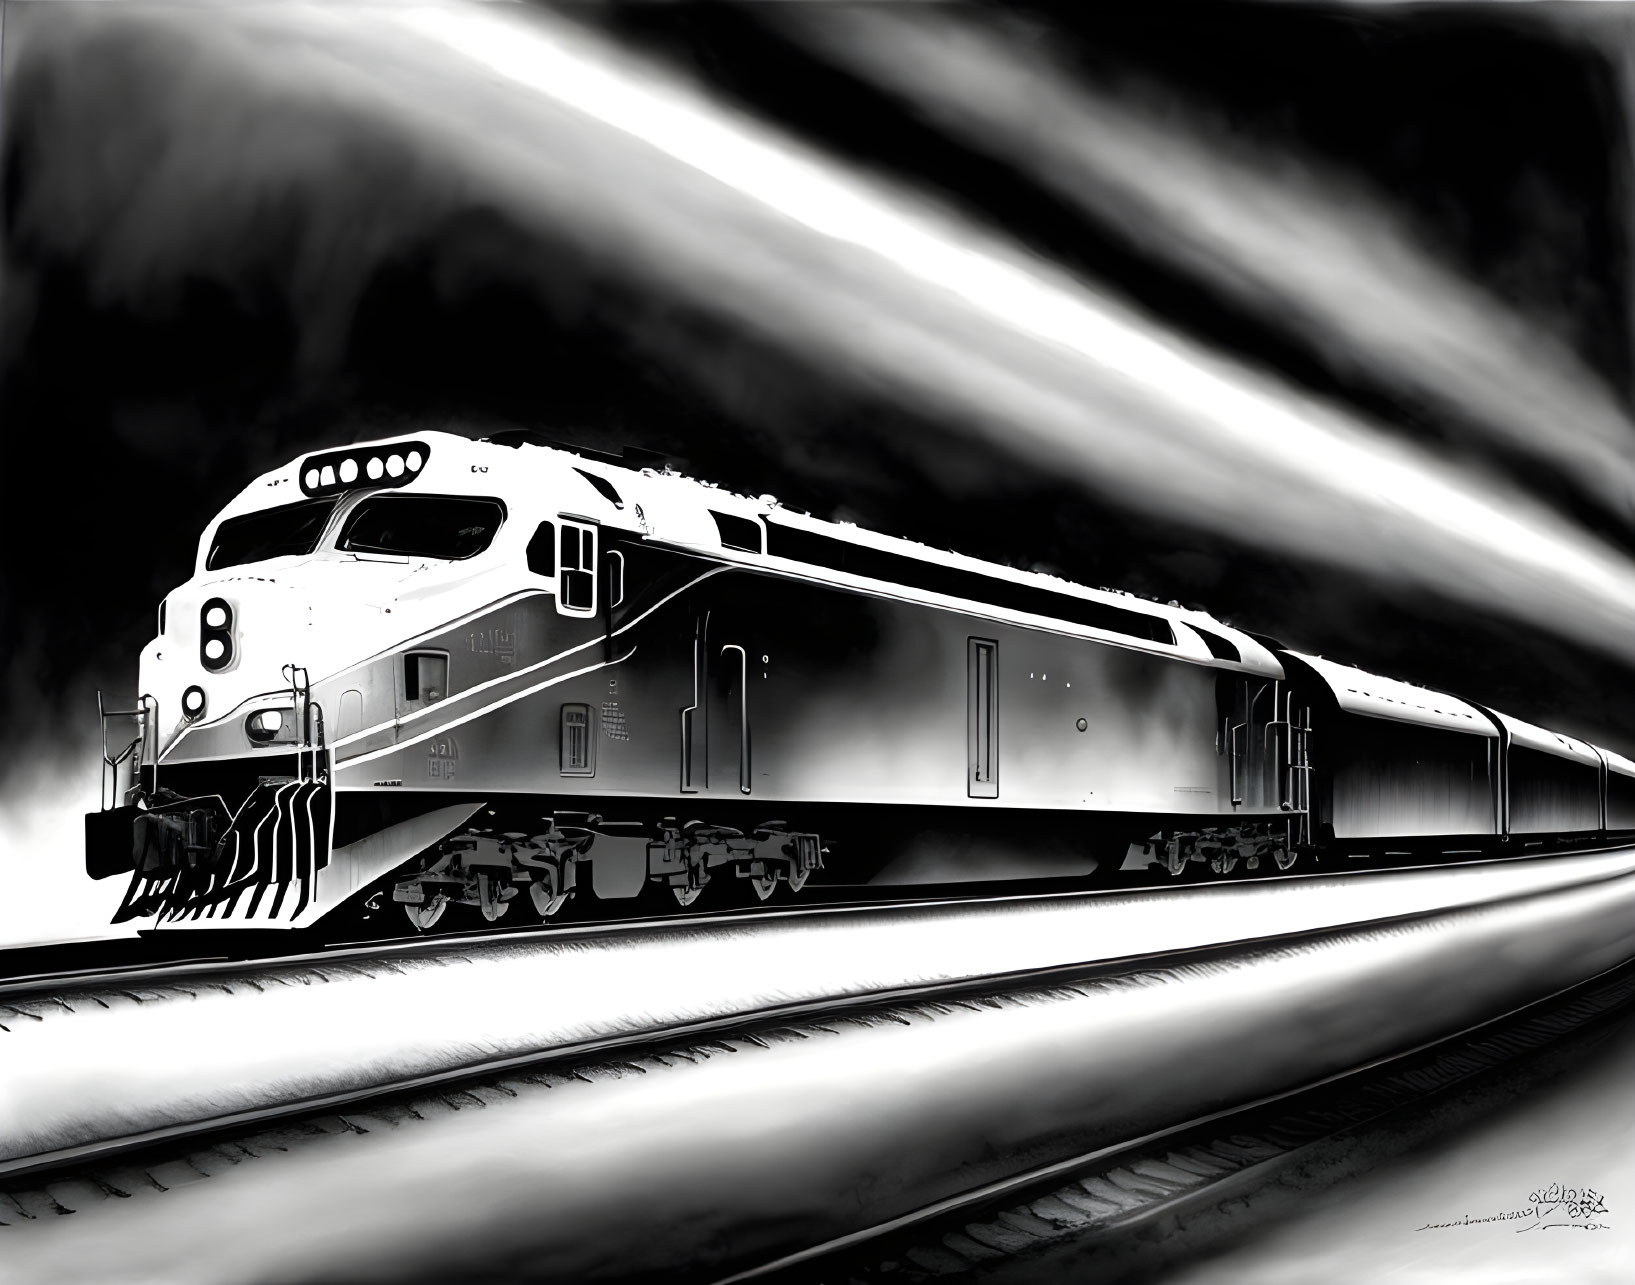 Vintage locomotive on tracks with dynamic light streaks in black and white.